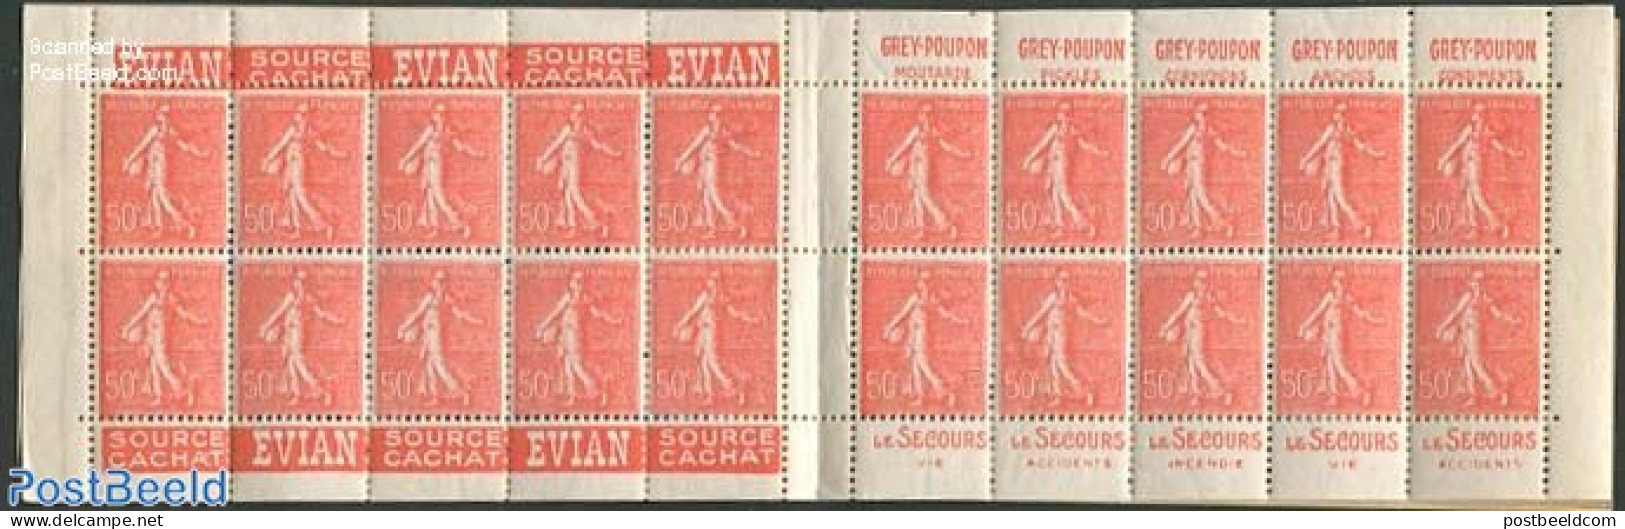 France 1924 20x50c Booklet (Evian-Grey Pooupon-Evian-Le Secours), Mint NH, Stamp Booklets - Nuovi